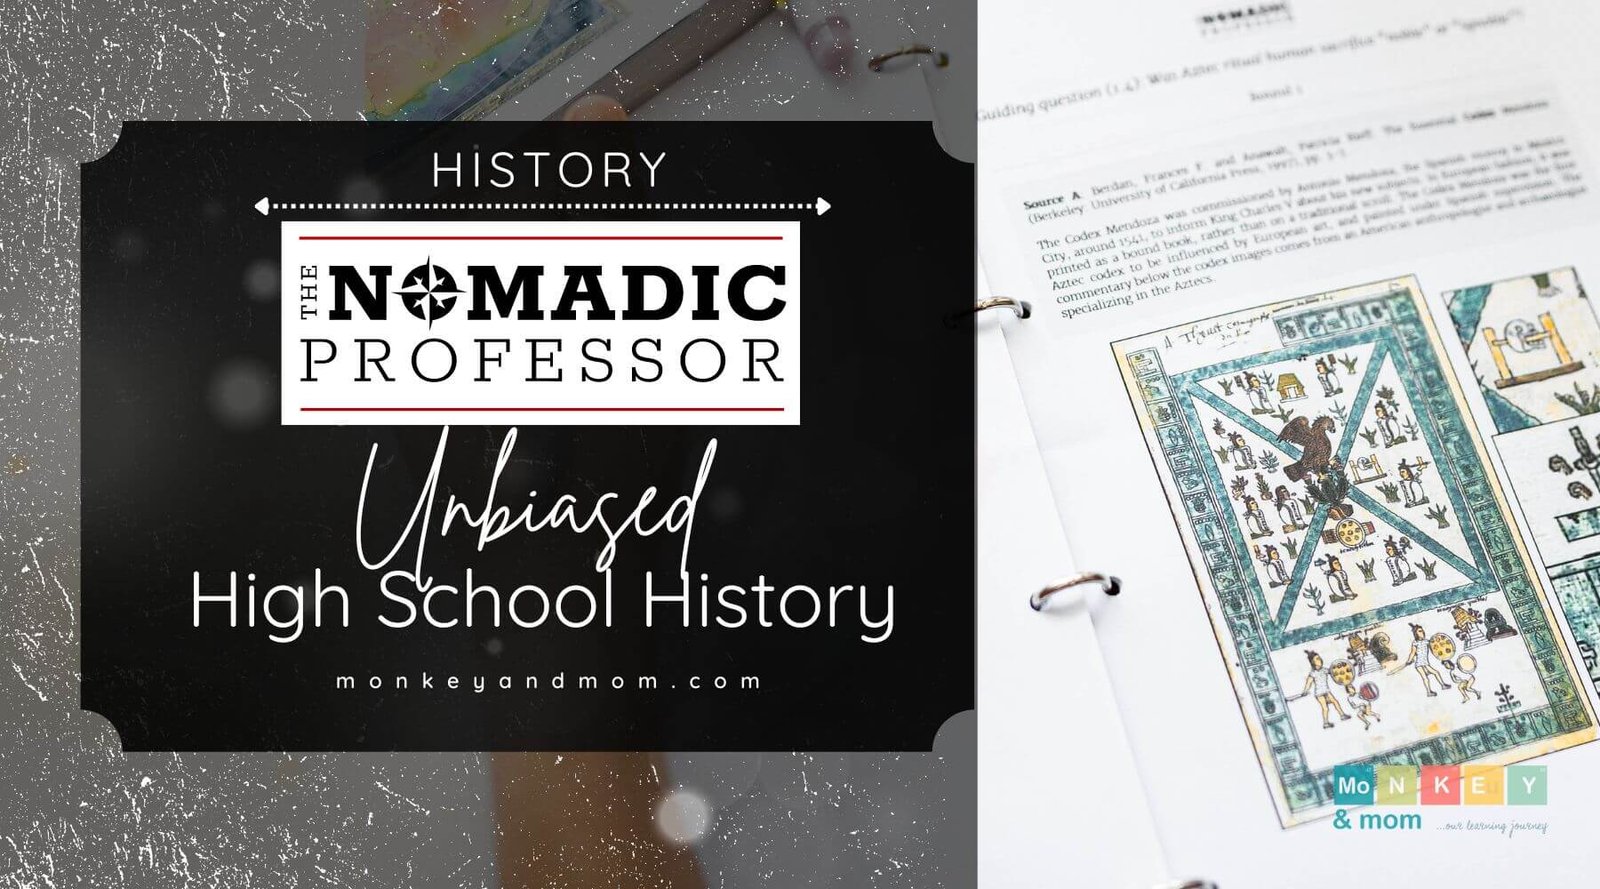 One-of-a-Kind Unbiased High School History Curriculum | The Nomadic Professor Review